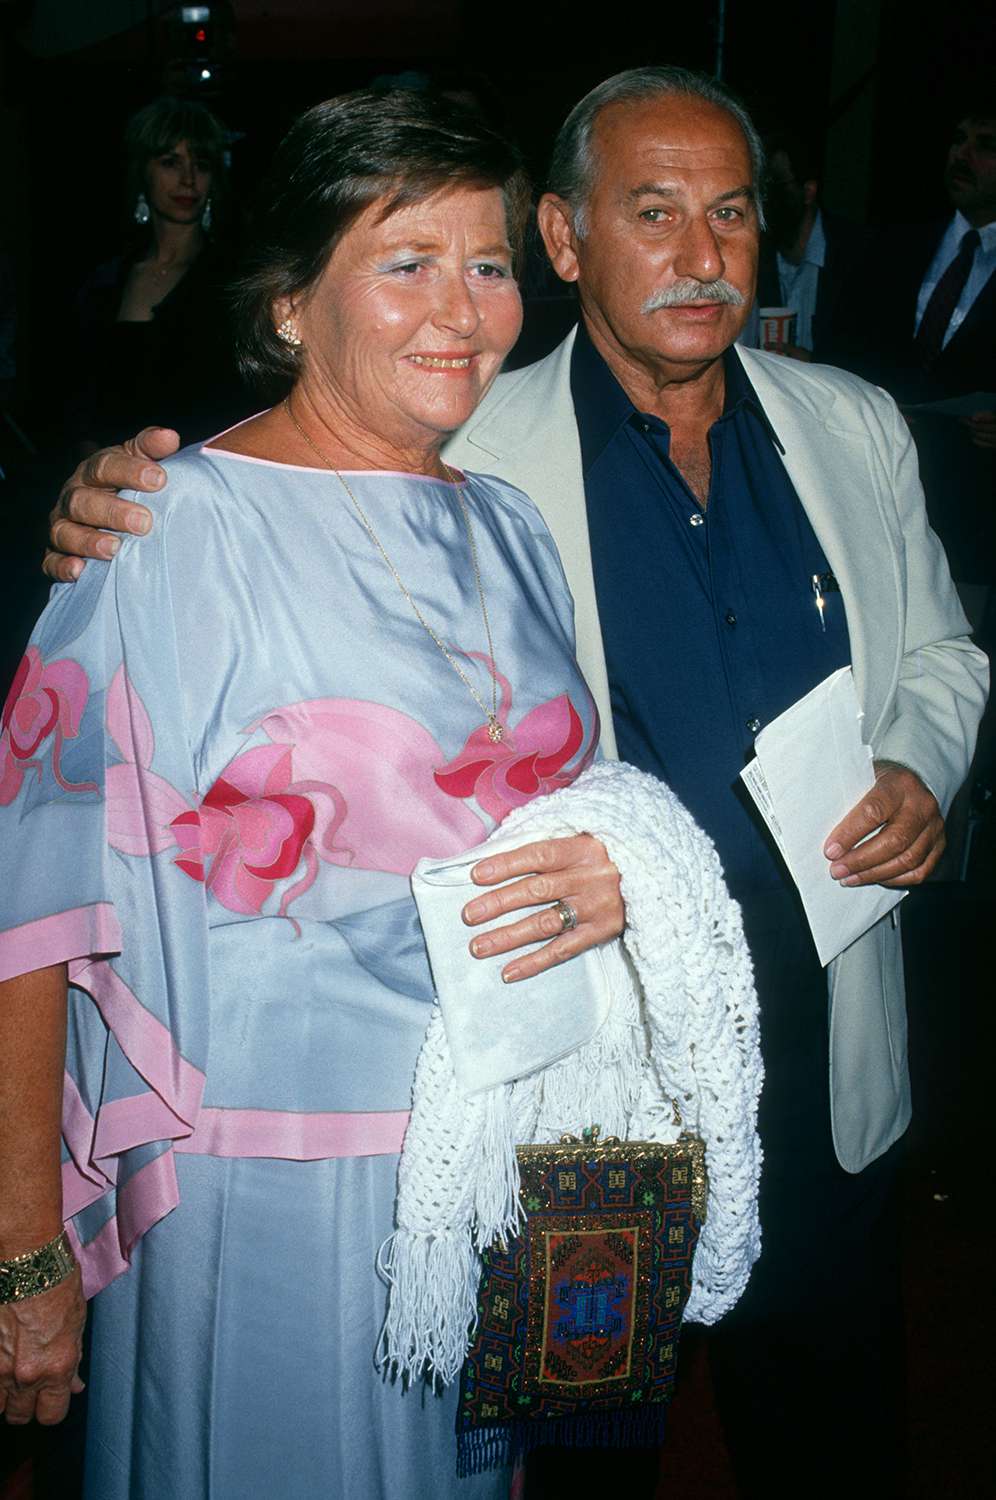 Milton Rubenfeld and Judy Rubenfeld attending the premiere of 'Big Top Pee Wee' on July 21, 1988 at Mann Chinese Theater in Hollywood, California.